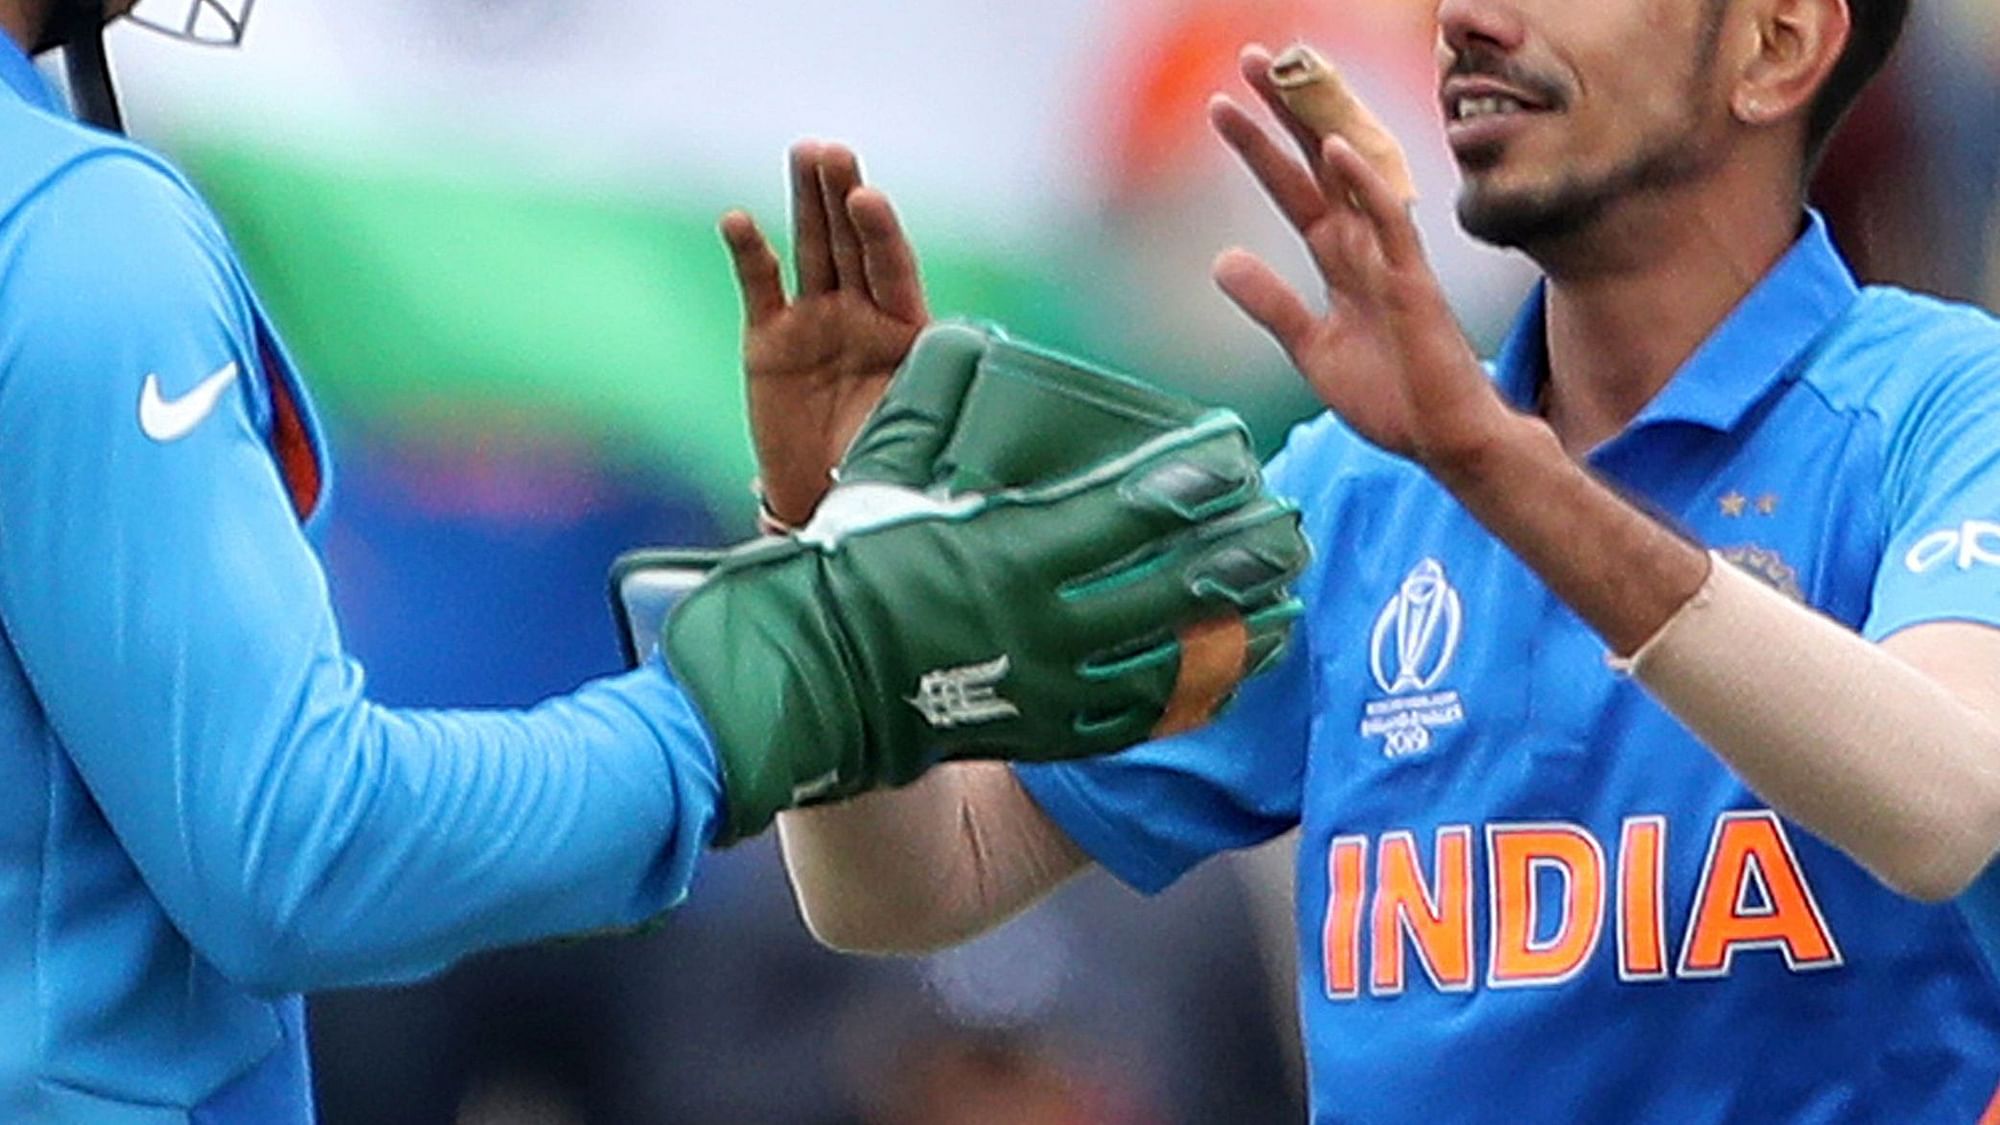 MS Dhoni was seen sporting Army insignia on his wicket-keeping gloves during the ongoing World Cup in England and Wales.